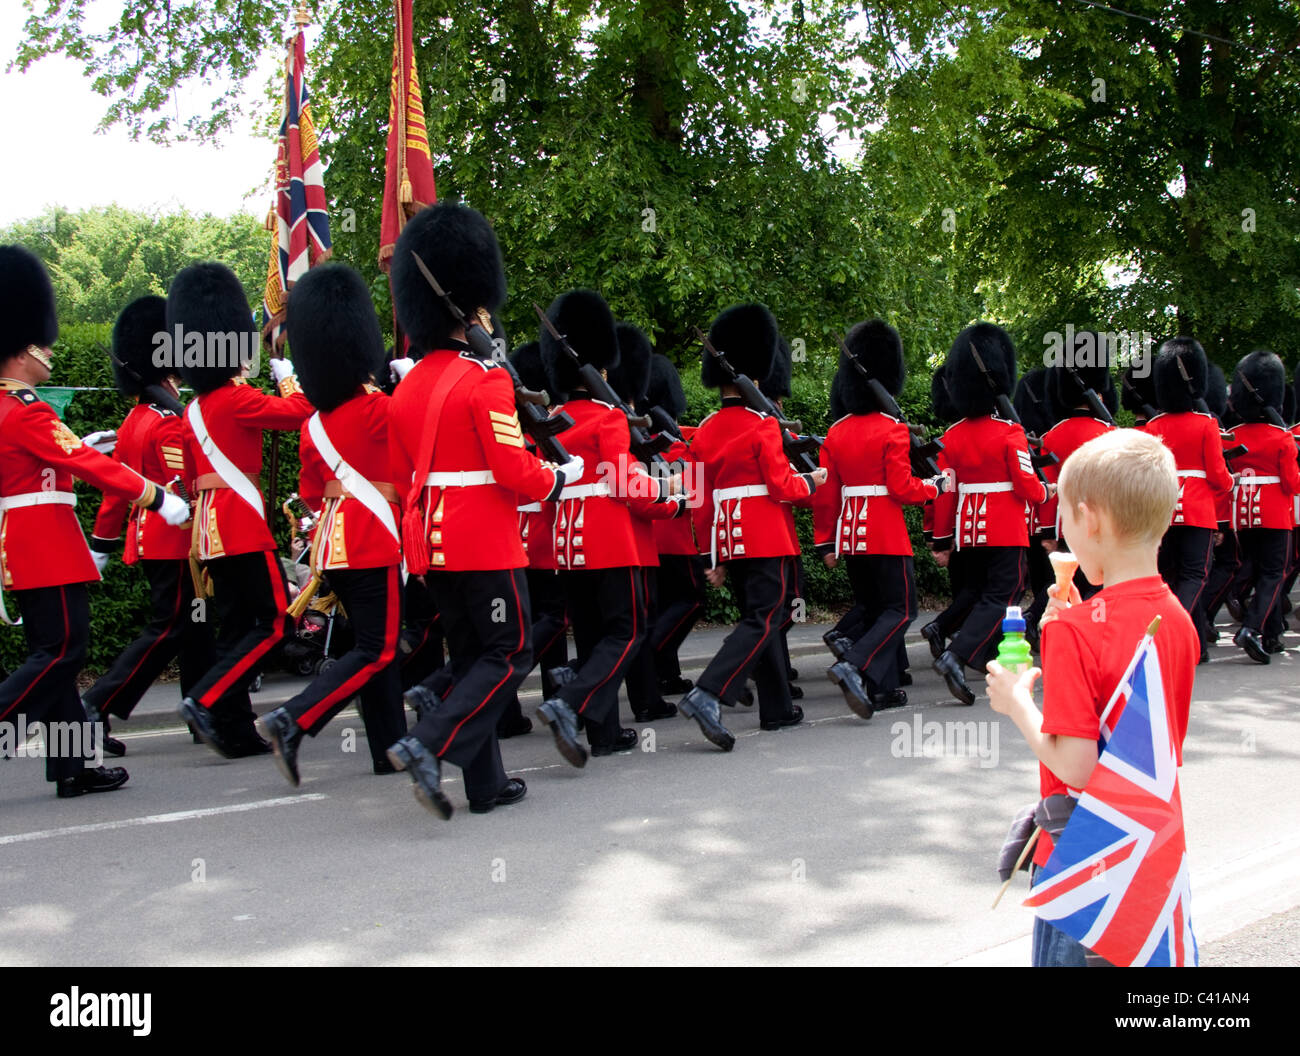 A young boy eating an ice cream cone and carrying a Union Flag watches a march-past of the Scots Guards on a sunny day. Stock Photo